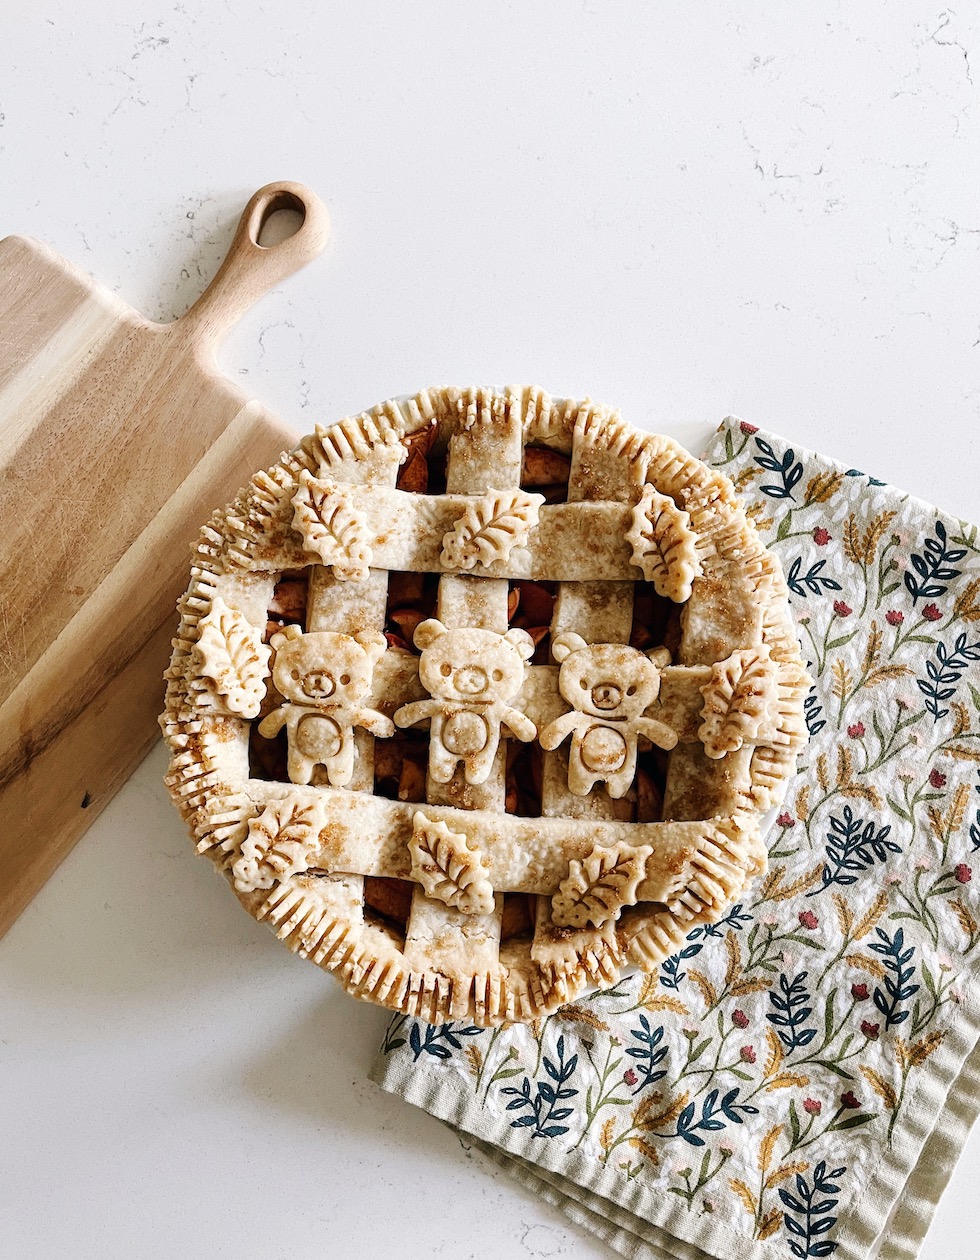 Pretty Pies, Baking Tools and Cookbooks (+ Video)